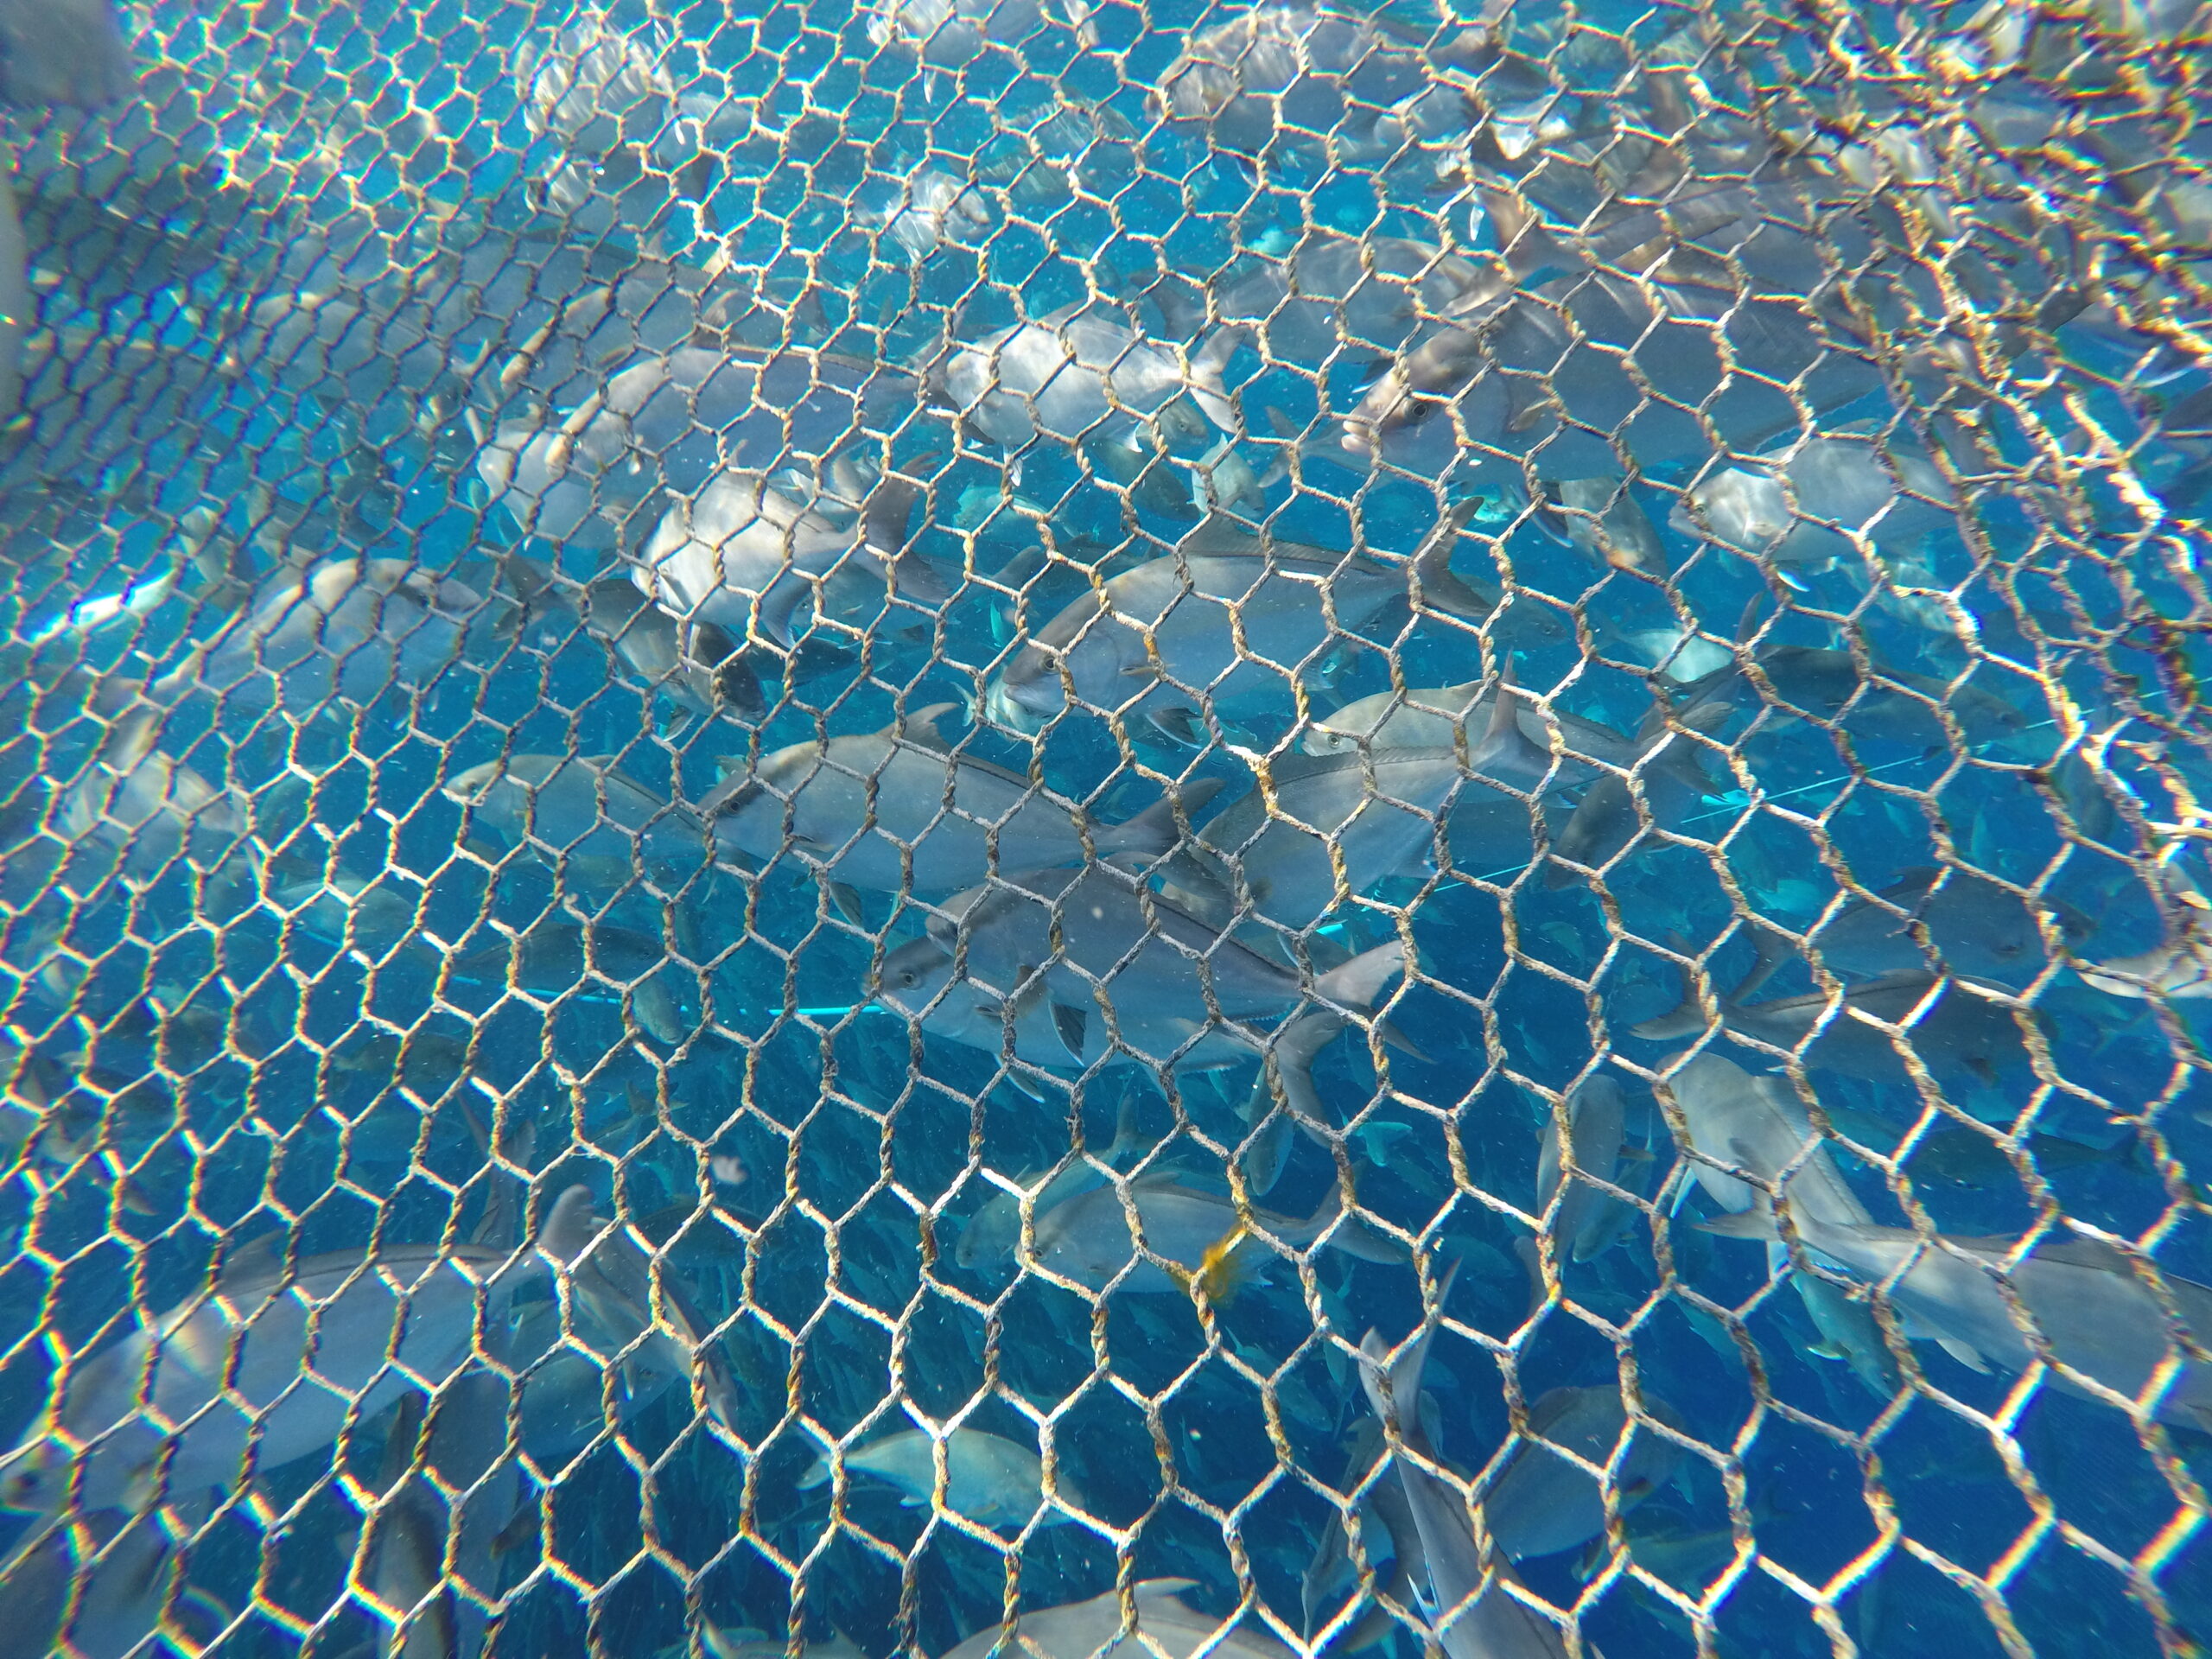 A photo of fish underwater behind a net